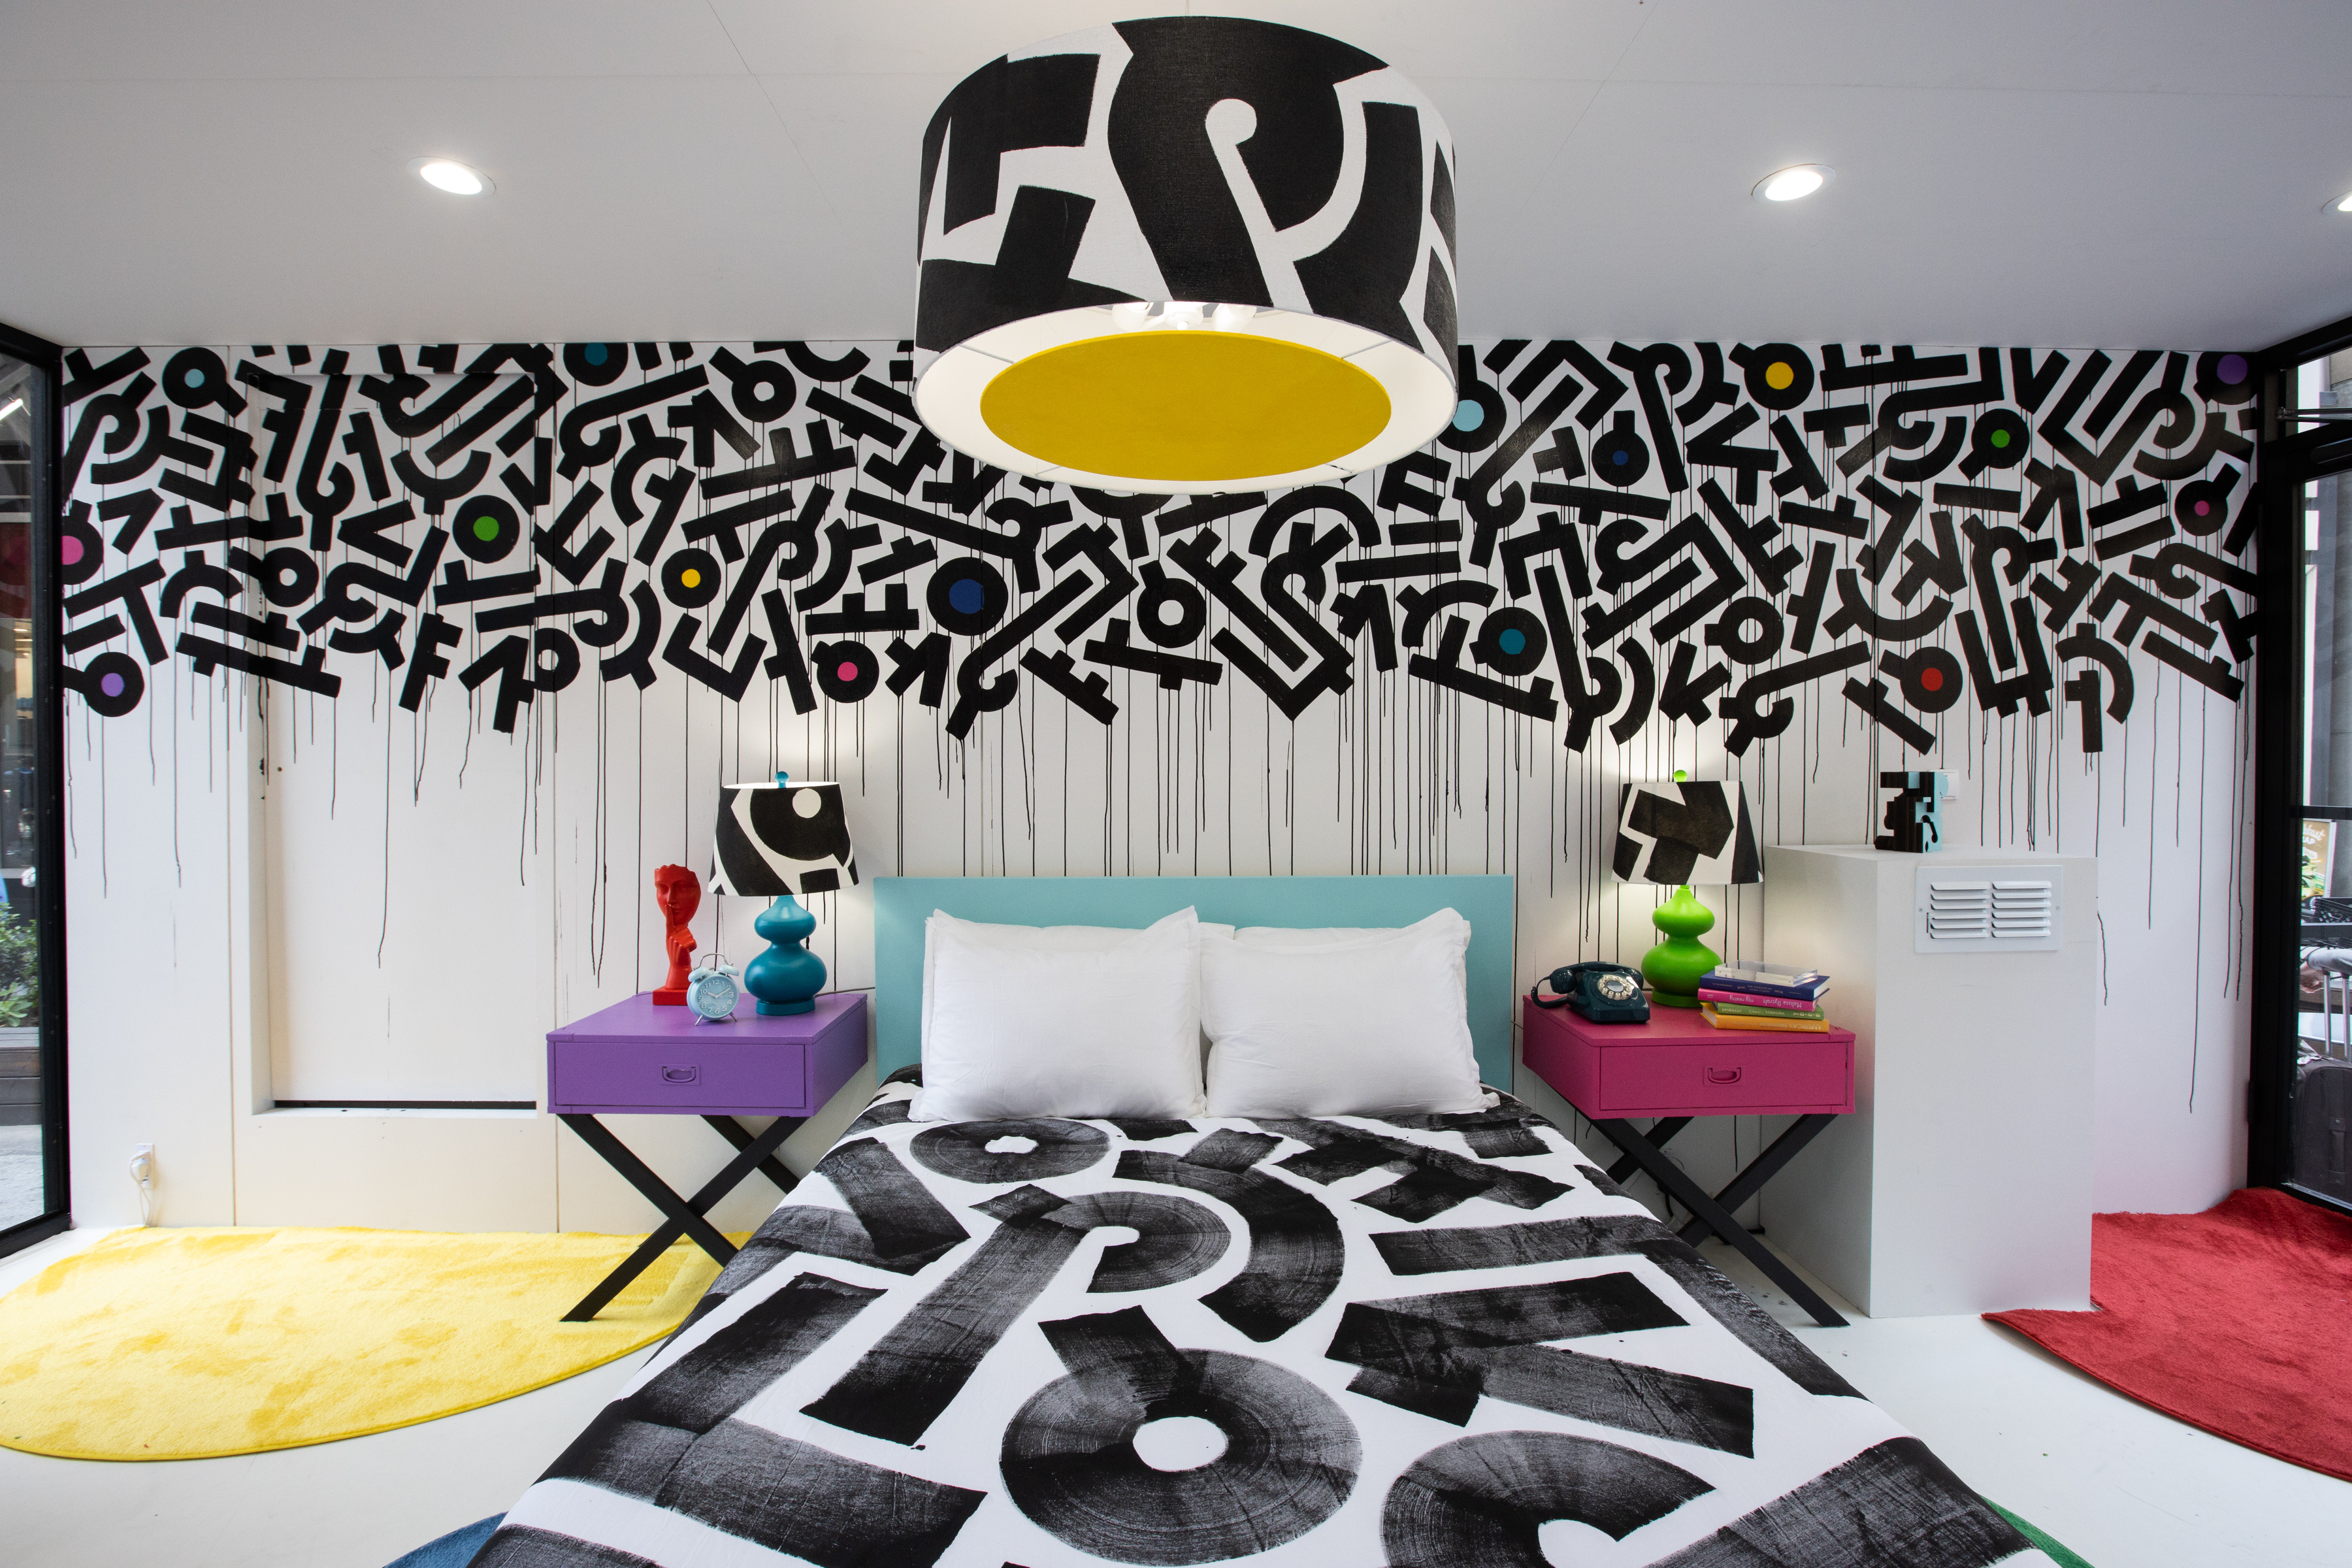 21c Museum Hotels MGallery Accor Pop-Up Suite